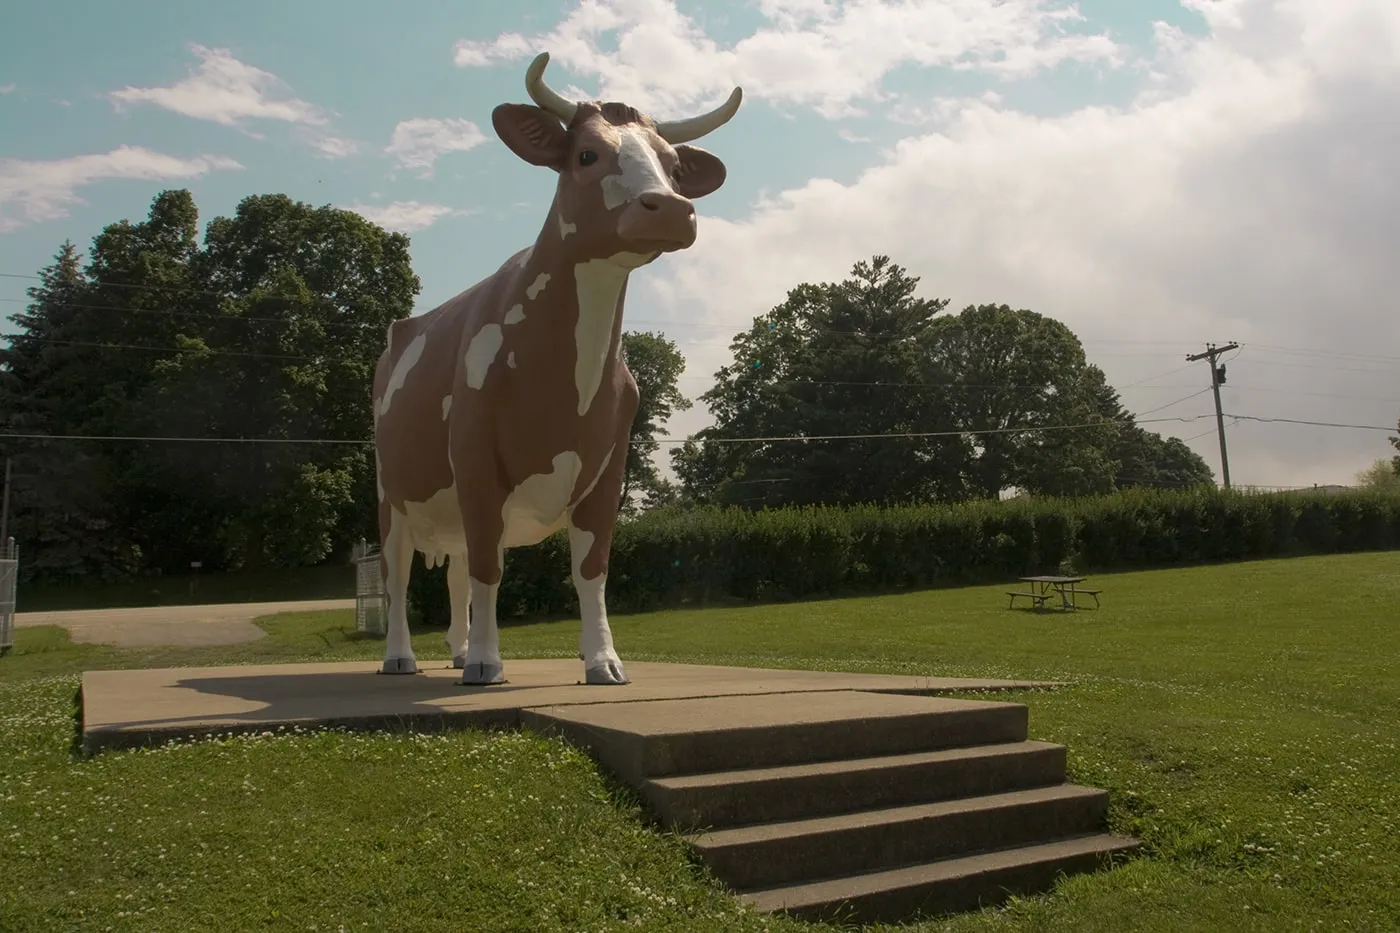 Gertrude the Cow - giant cow statue in Rockford, Illinois